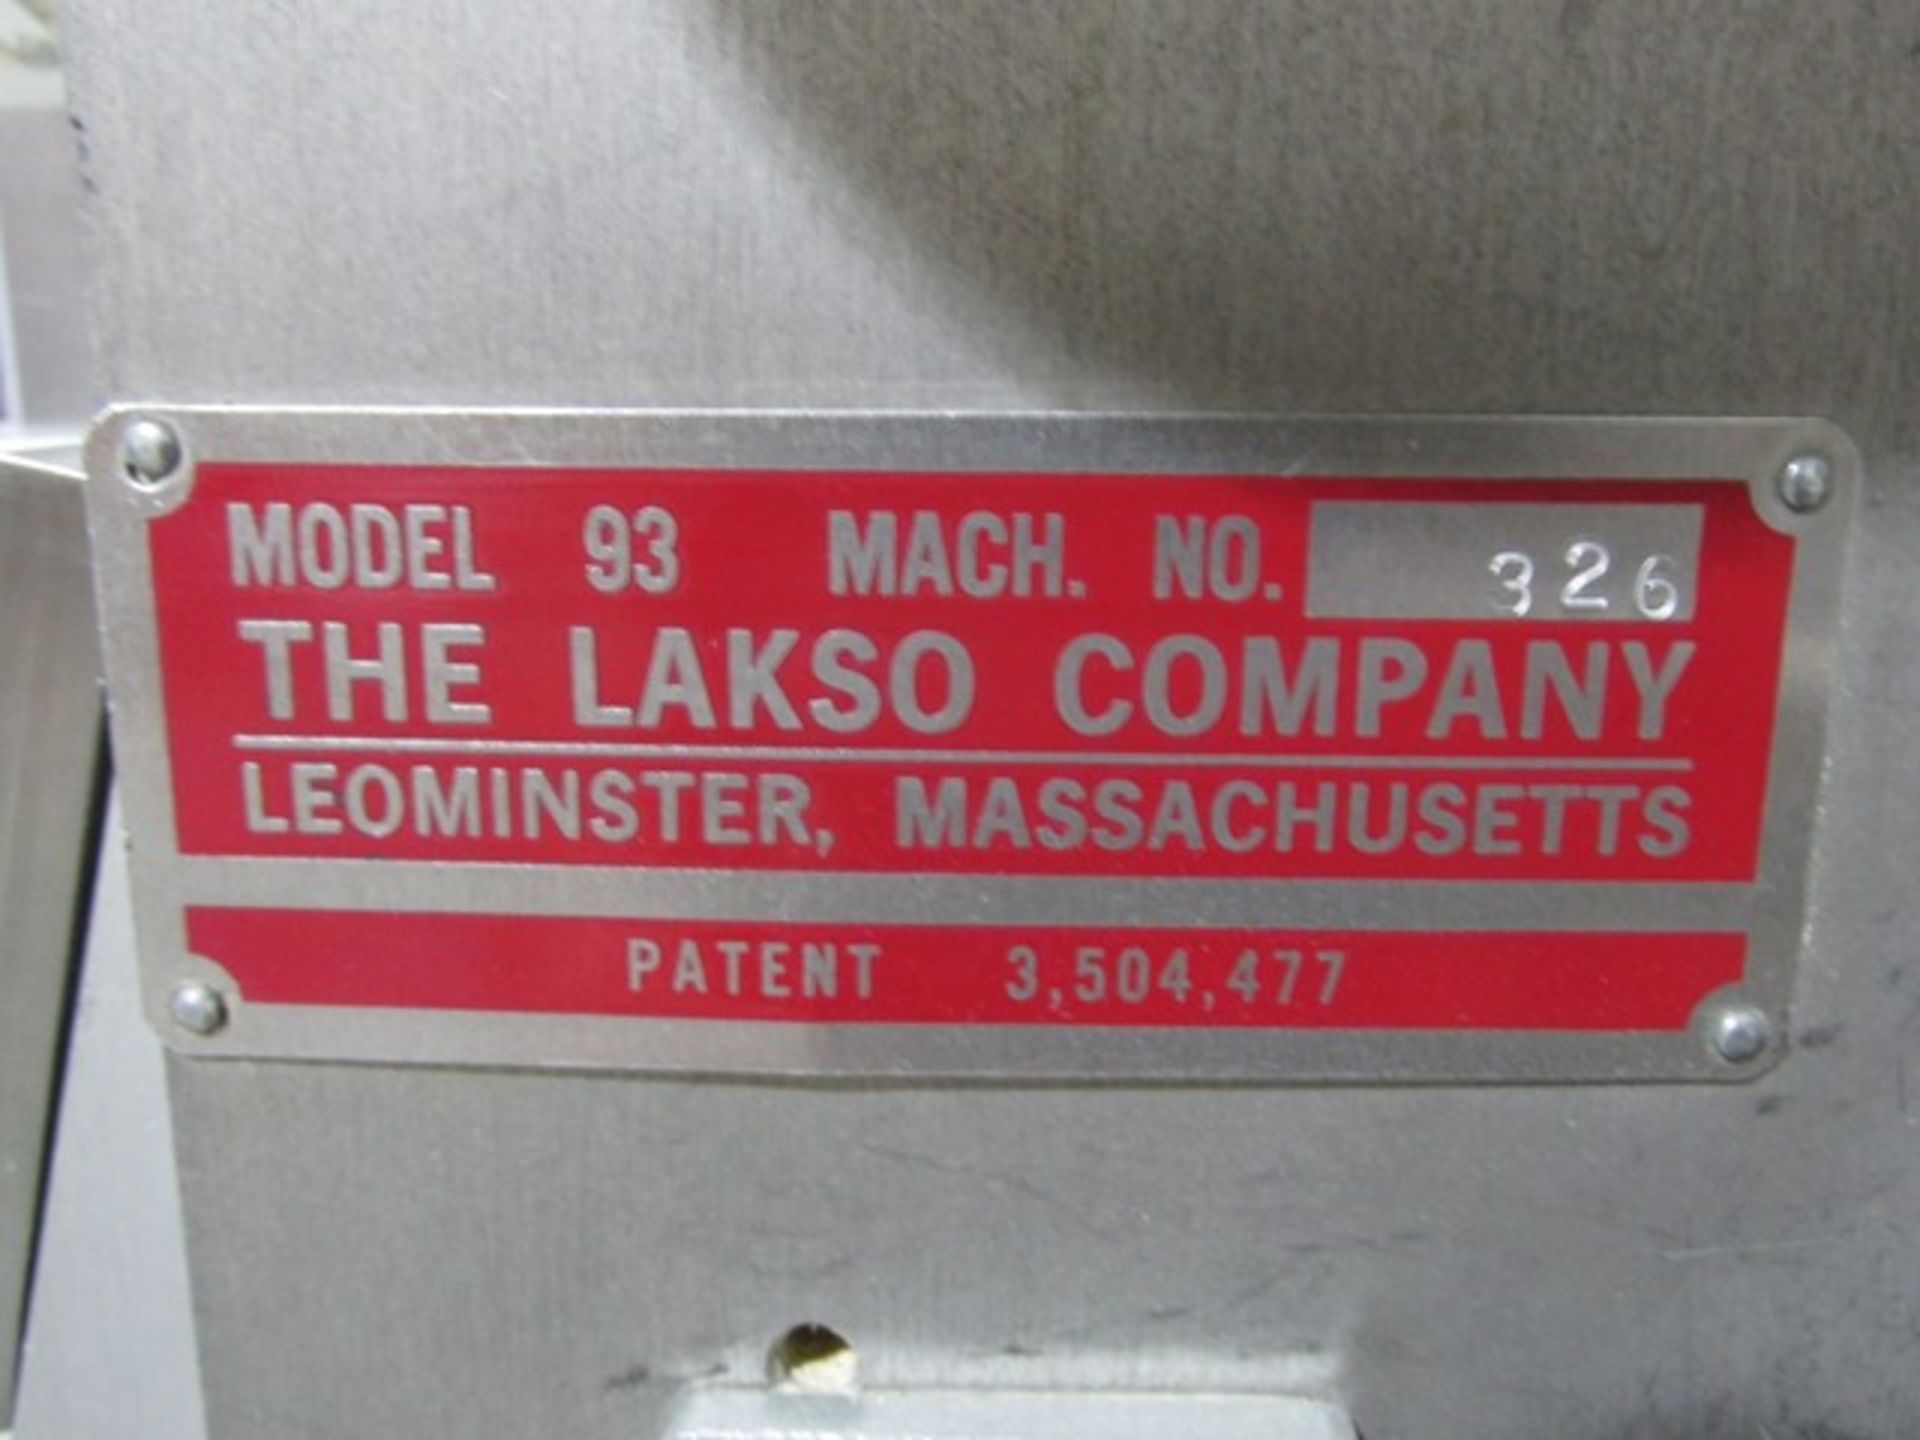 Lakso Reformer 300 slat counter, model 93, stainless steel feed hopper, mach# 326 - Image 13 of 15